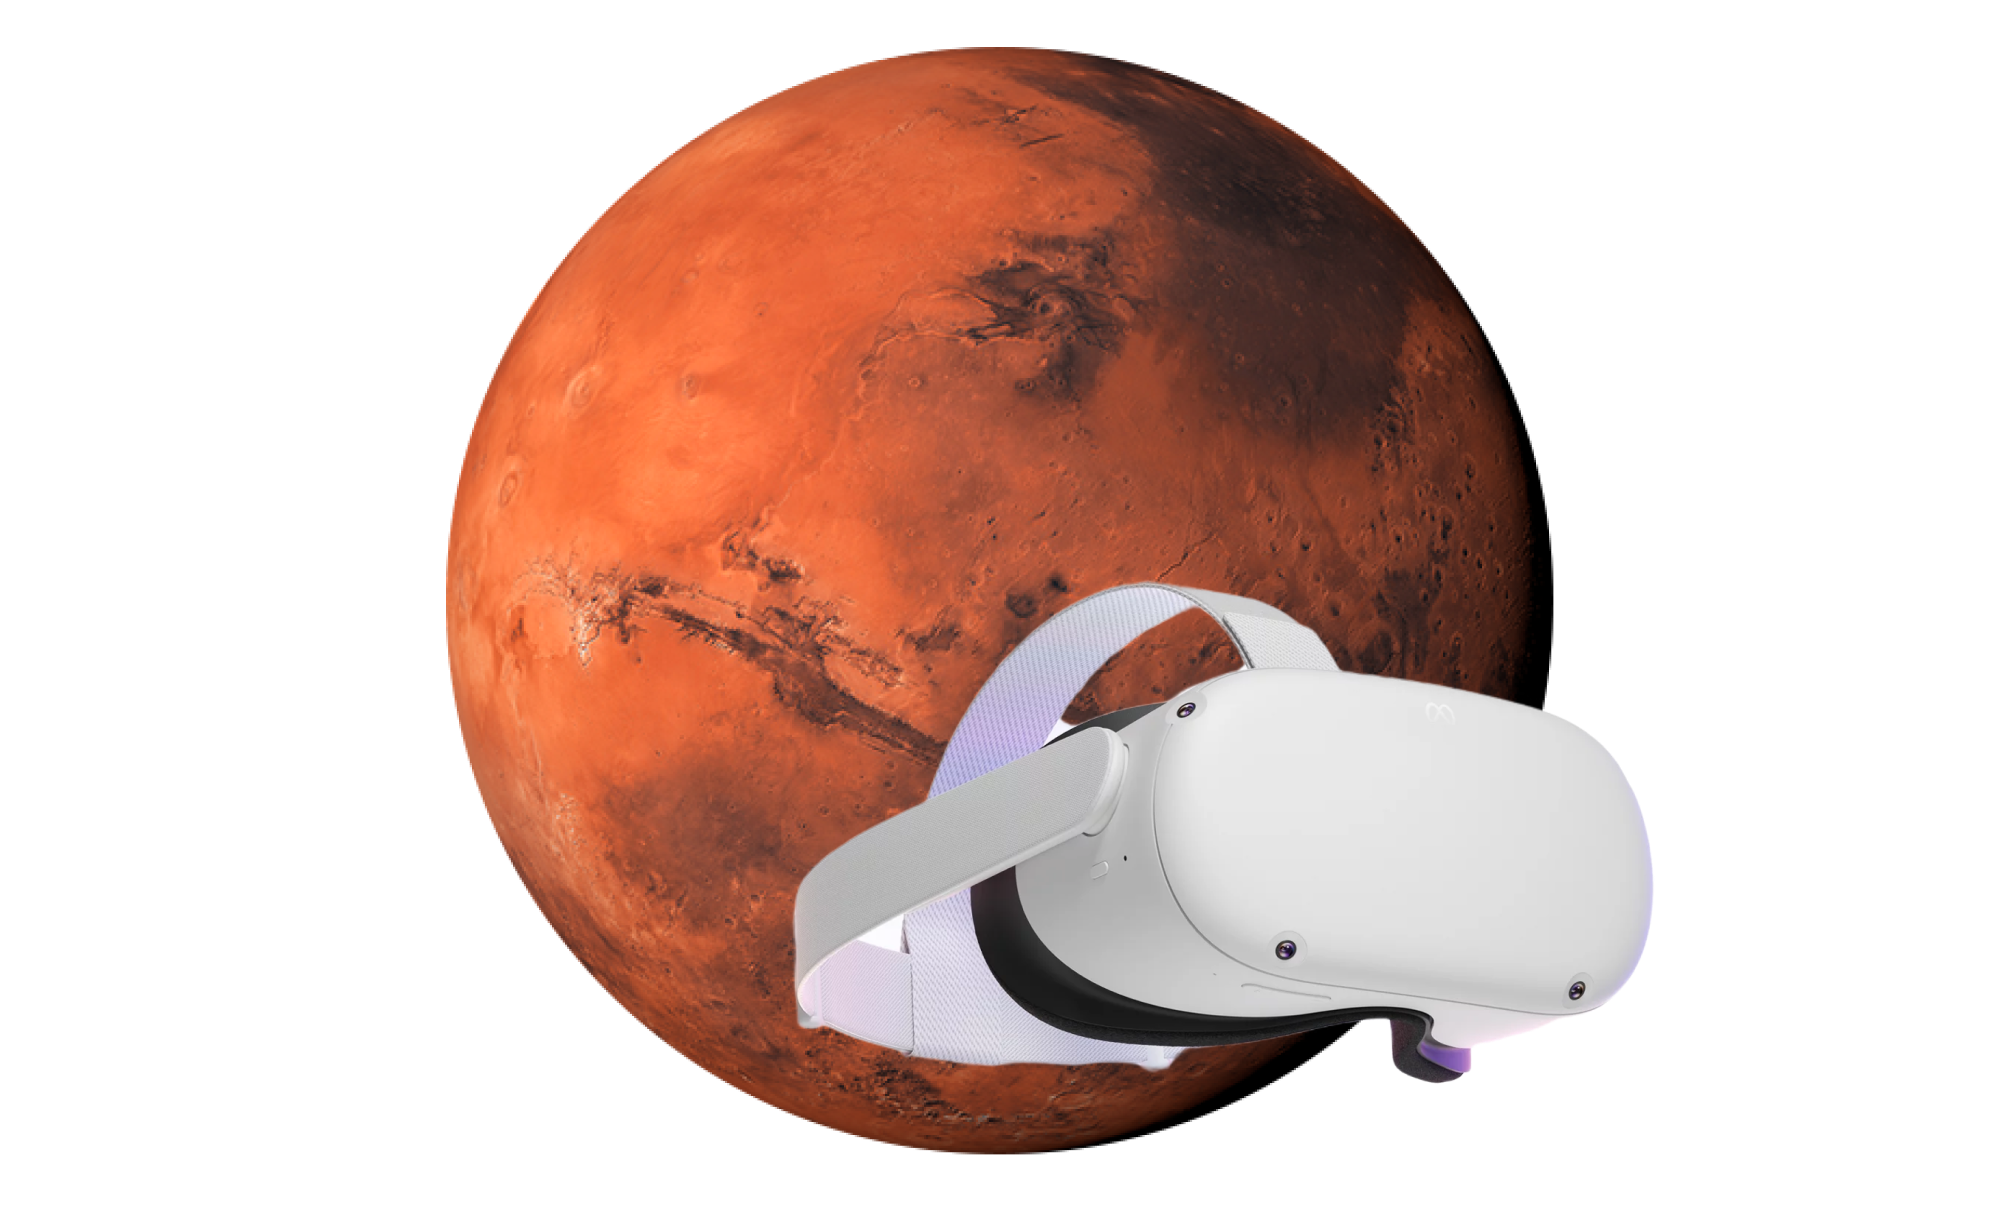 Mars planet with VR headset and controllers